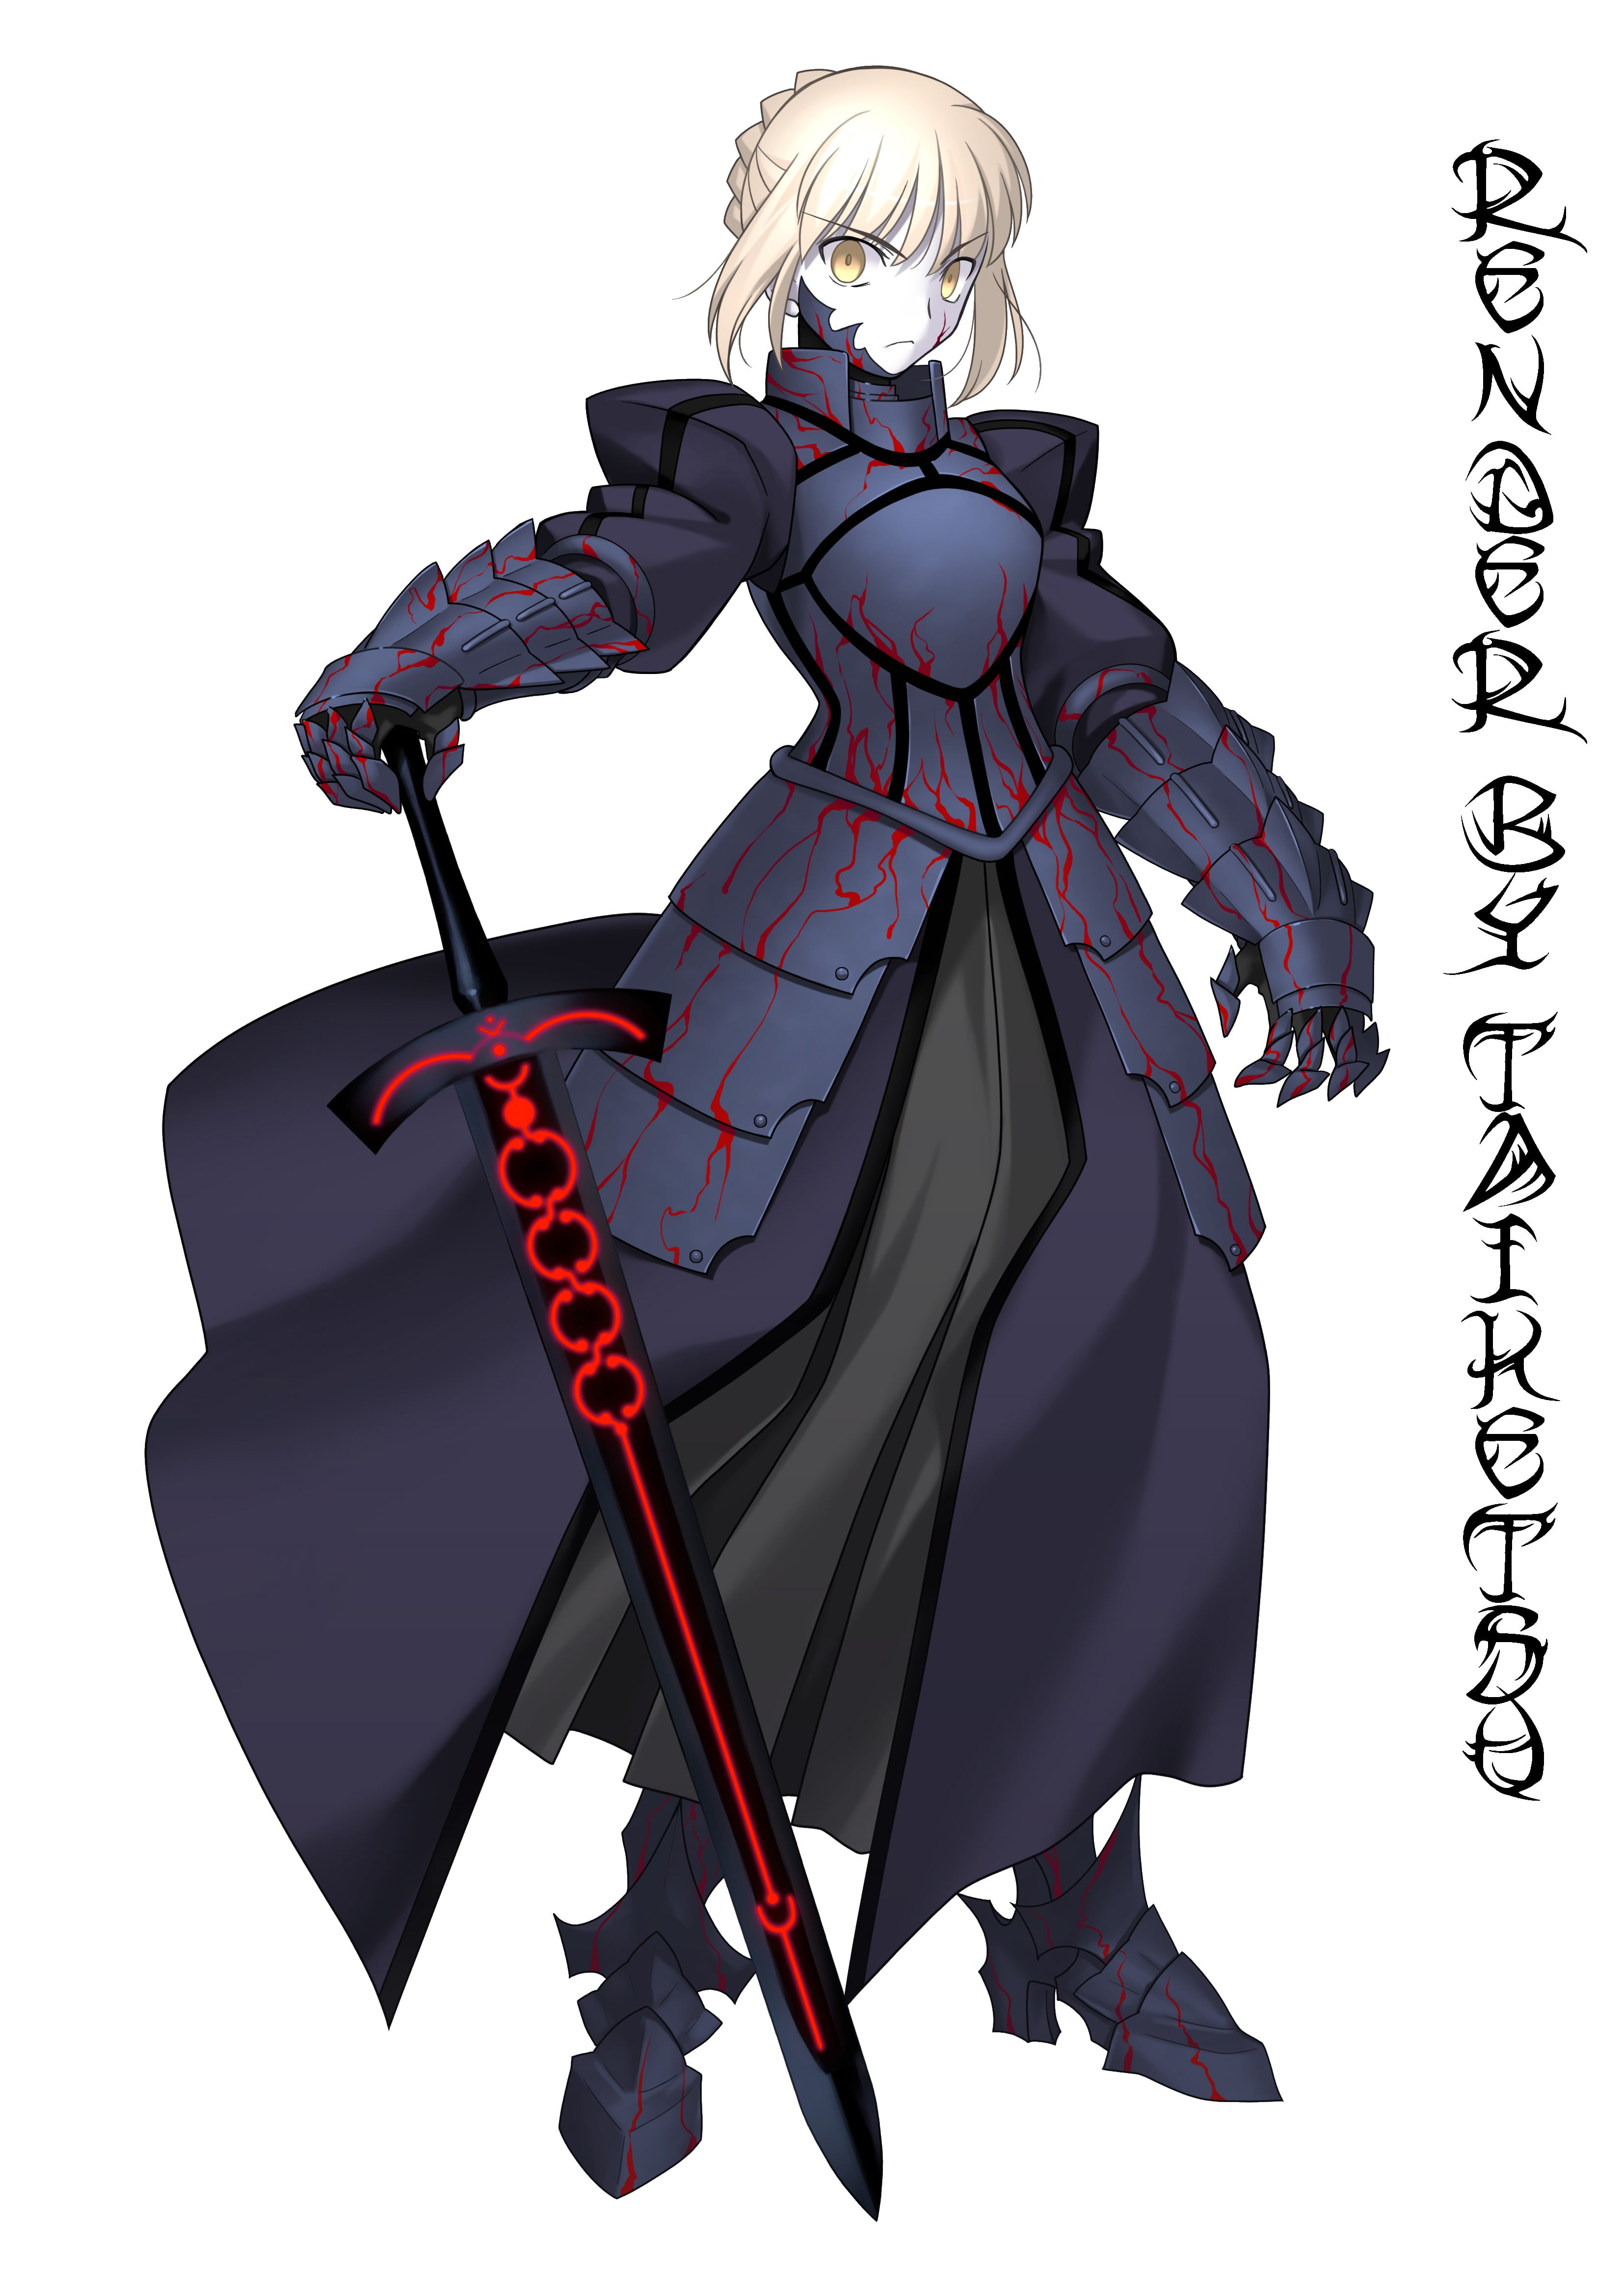 black and red sword illustraiton, Fate Series, Saber Alter, anime girls